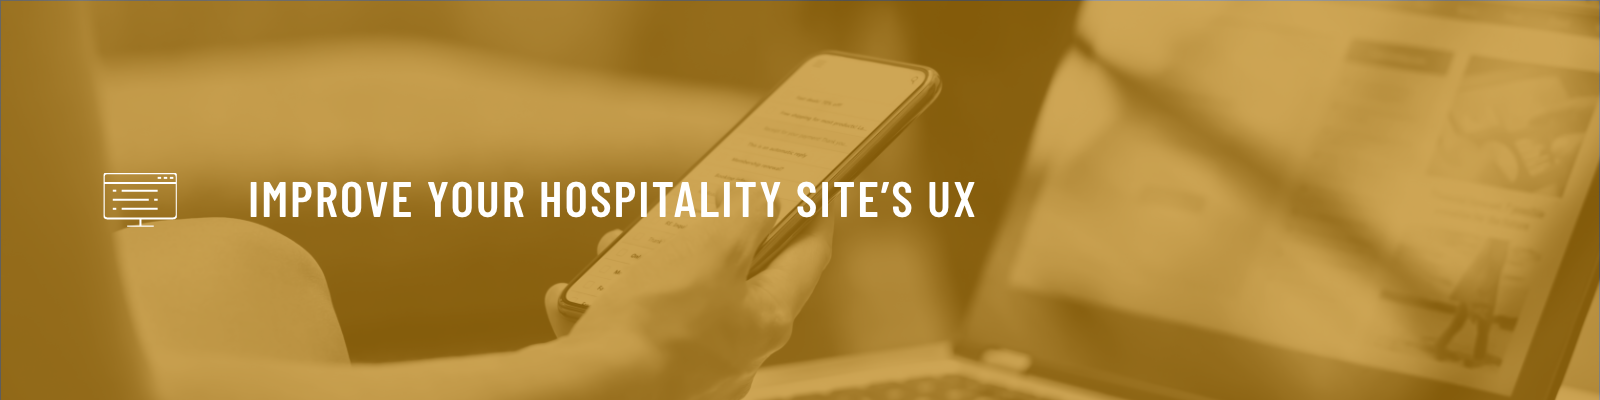 How to Improve Your Hospitality Site’s UX